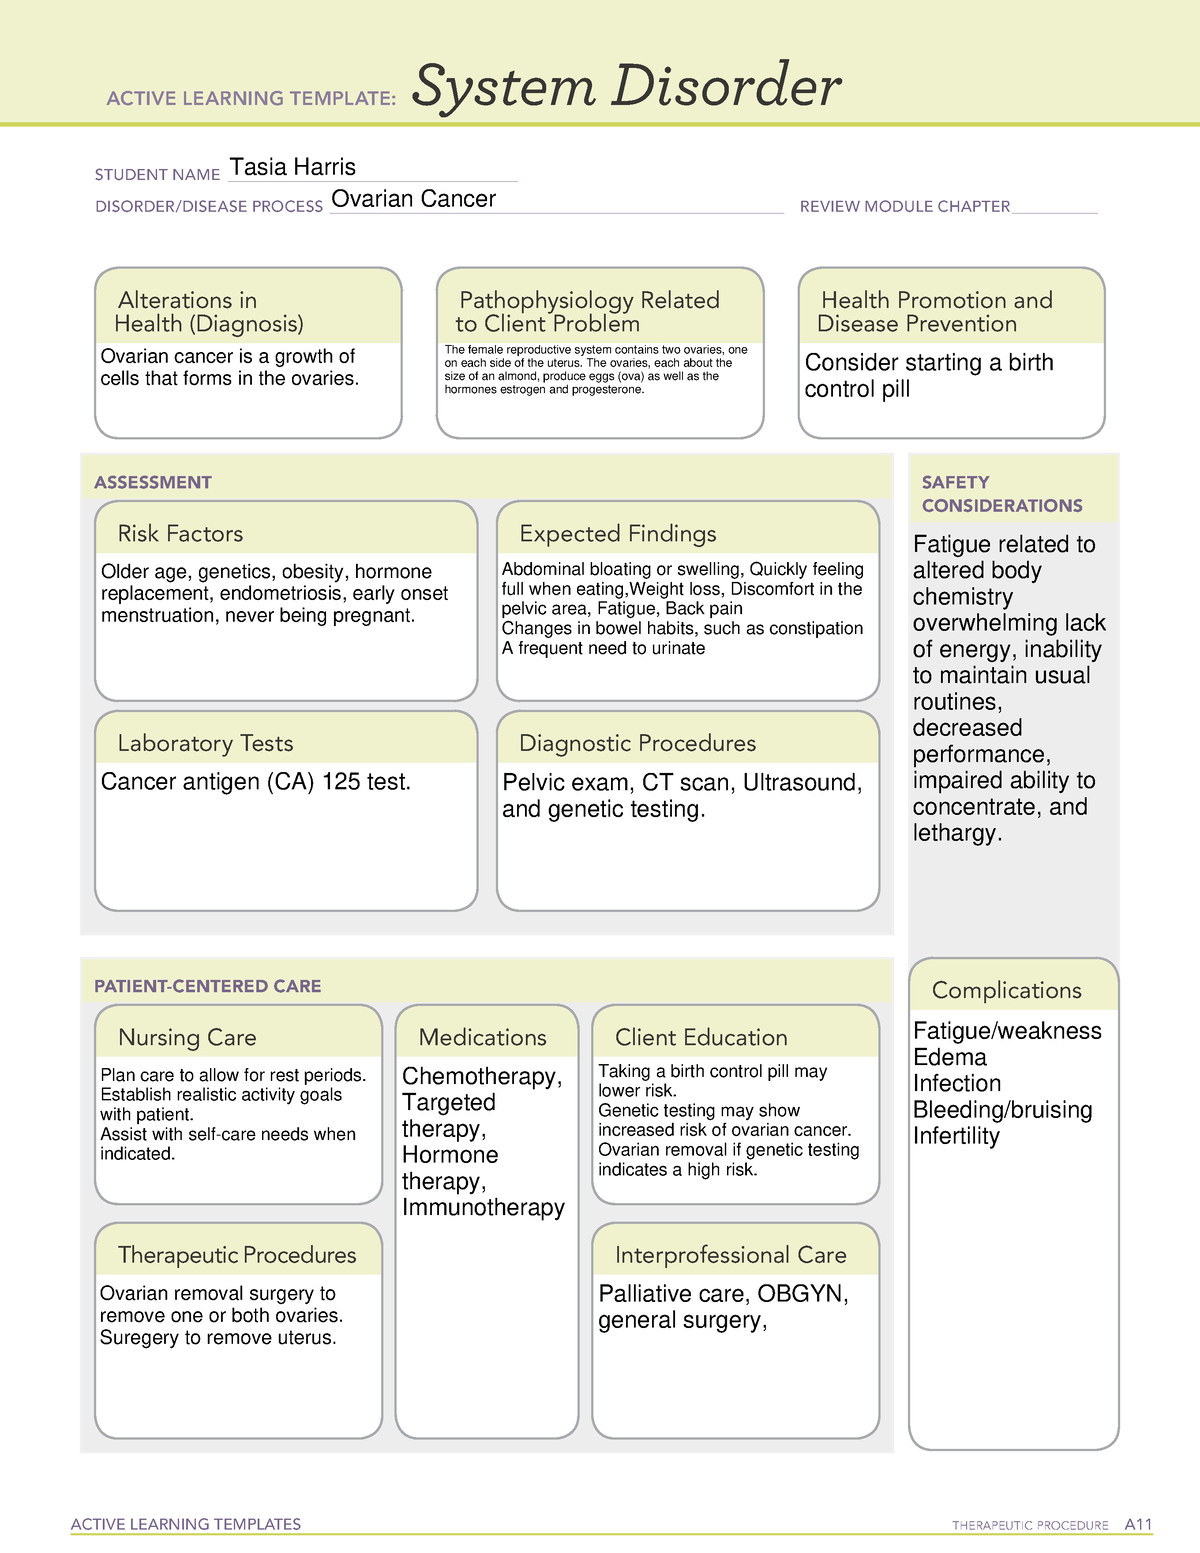 Active Learning Template sys Dis ovarian cancer - ACTIVE LEARNING ...